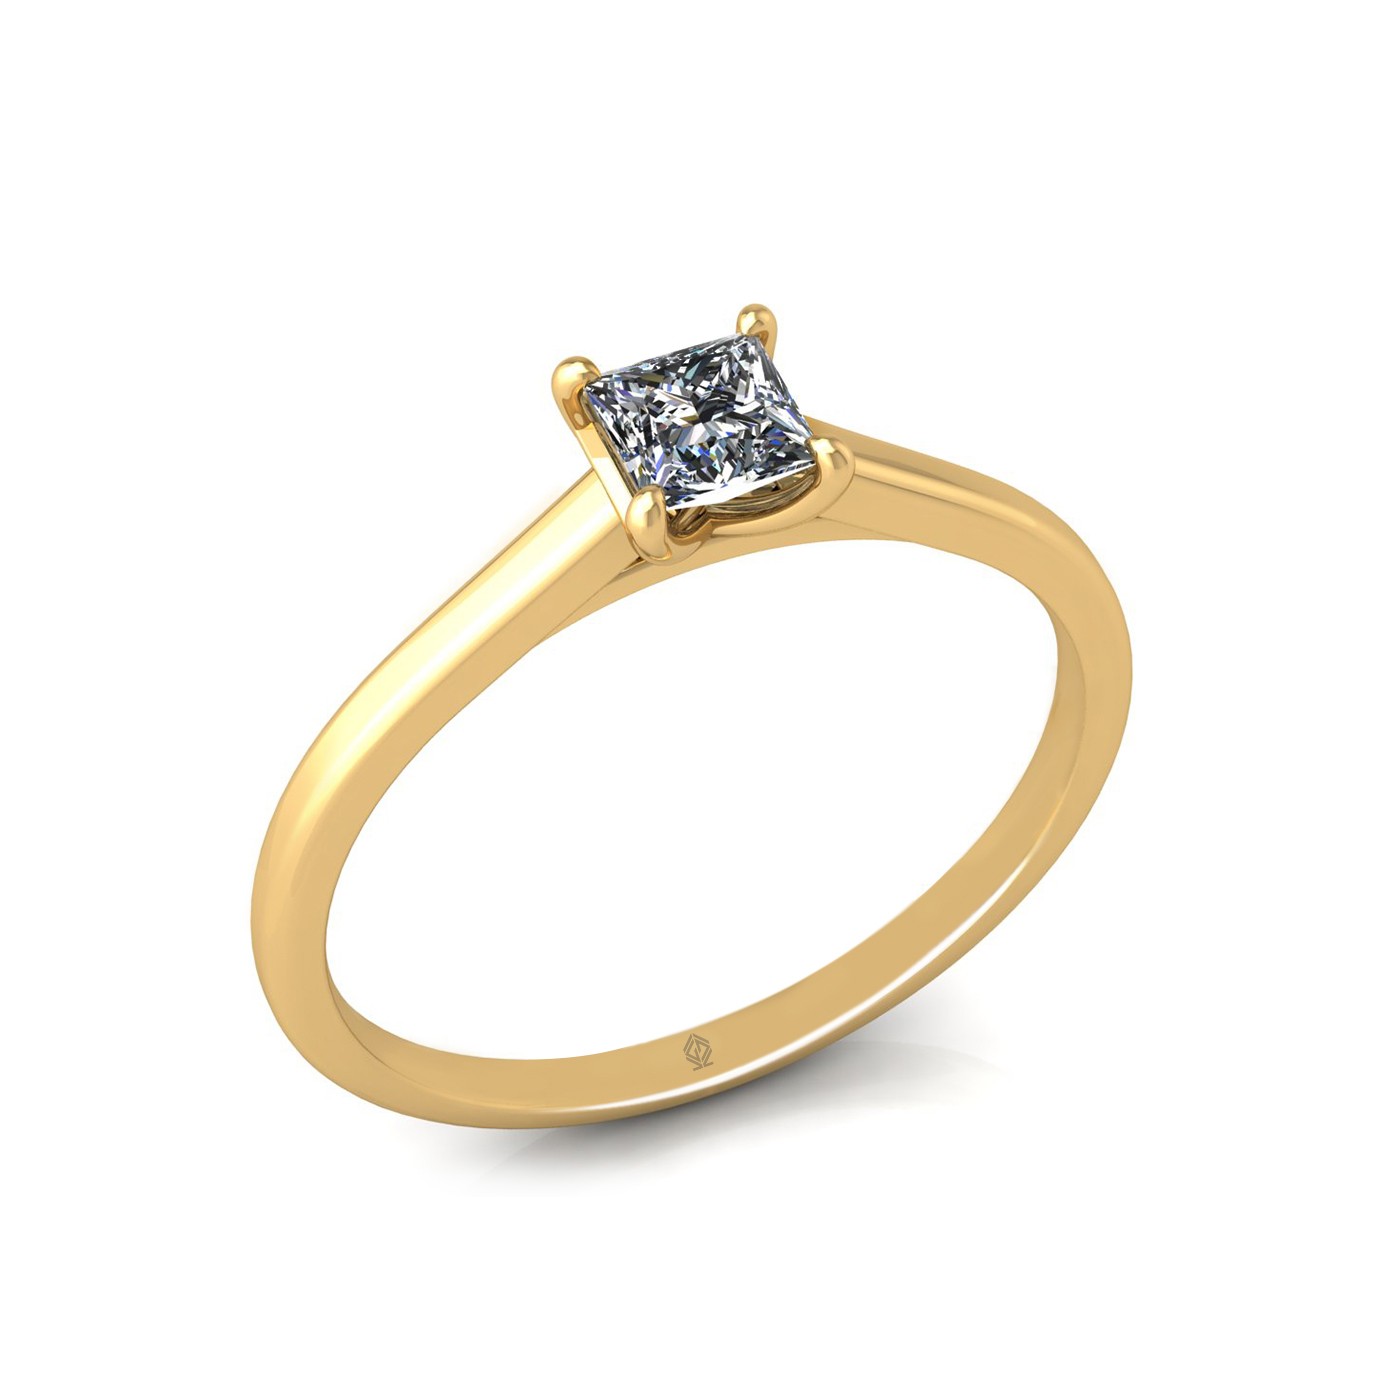 18k yellow gold  0,30 ct 4 prongs solitaire princess cut diamond engagement ring with whisper thin band